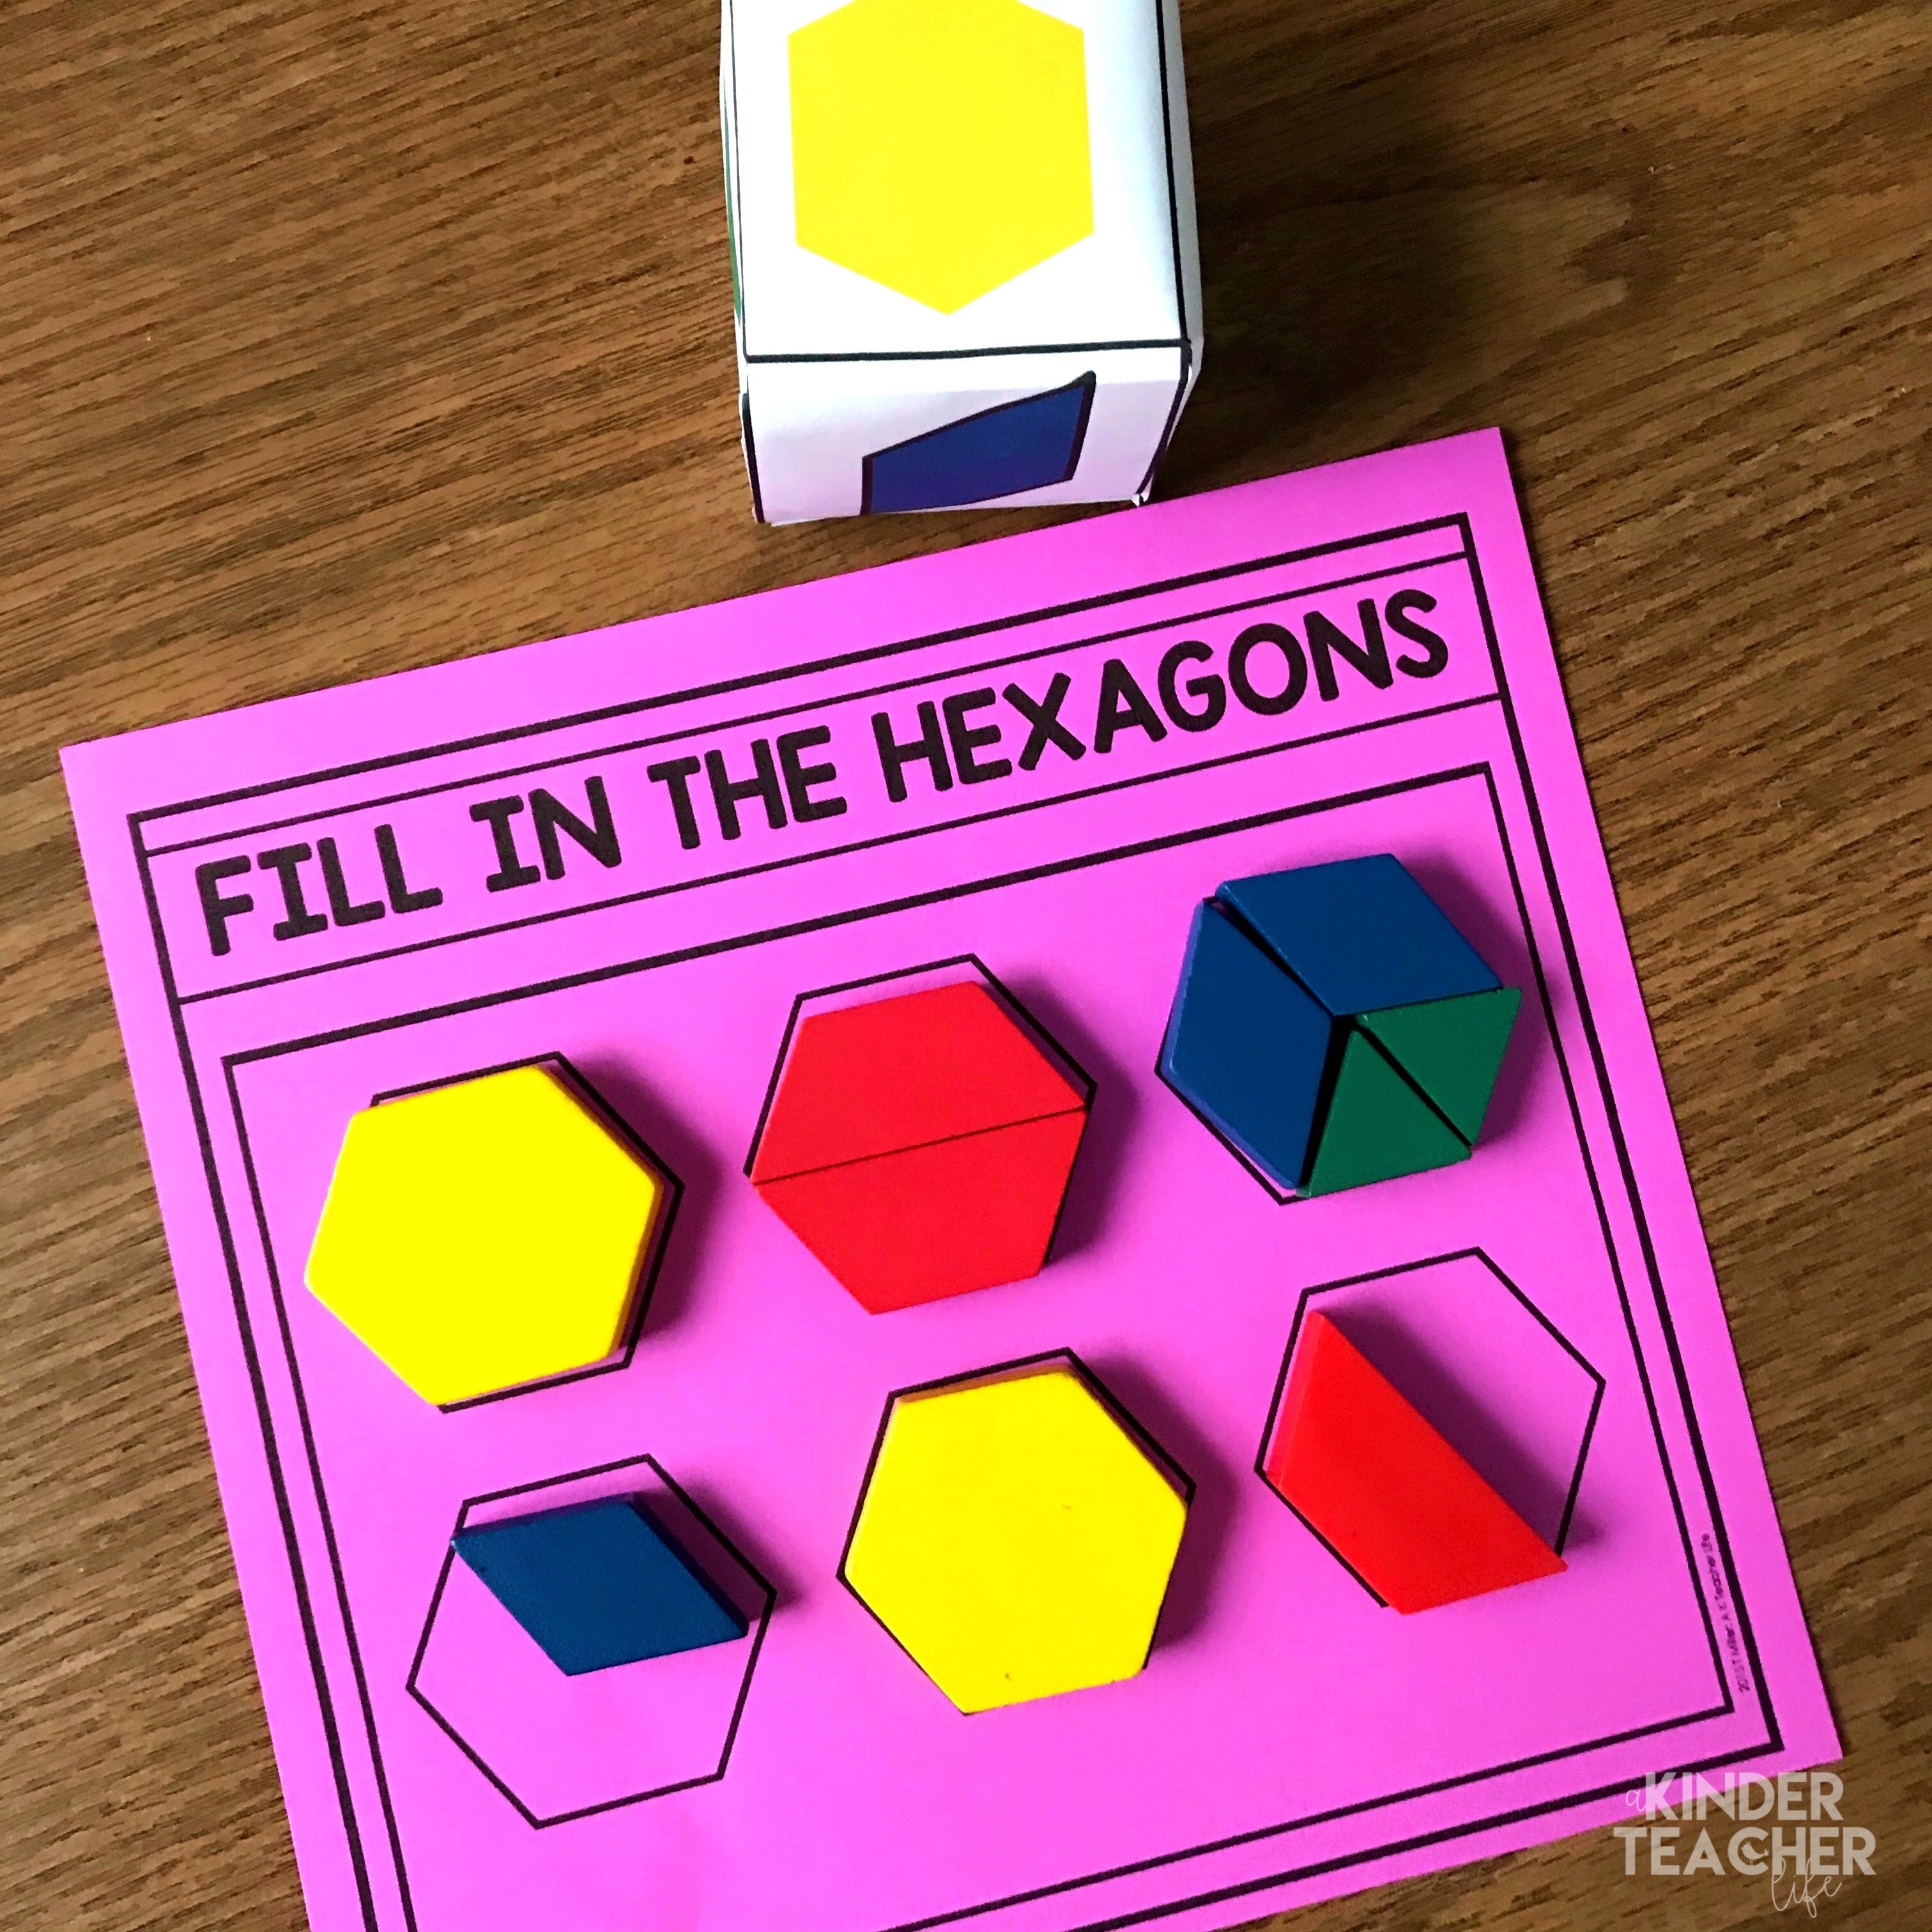 Use pattern blocks to compose hexagons. 